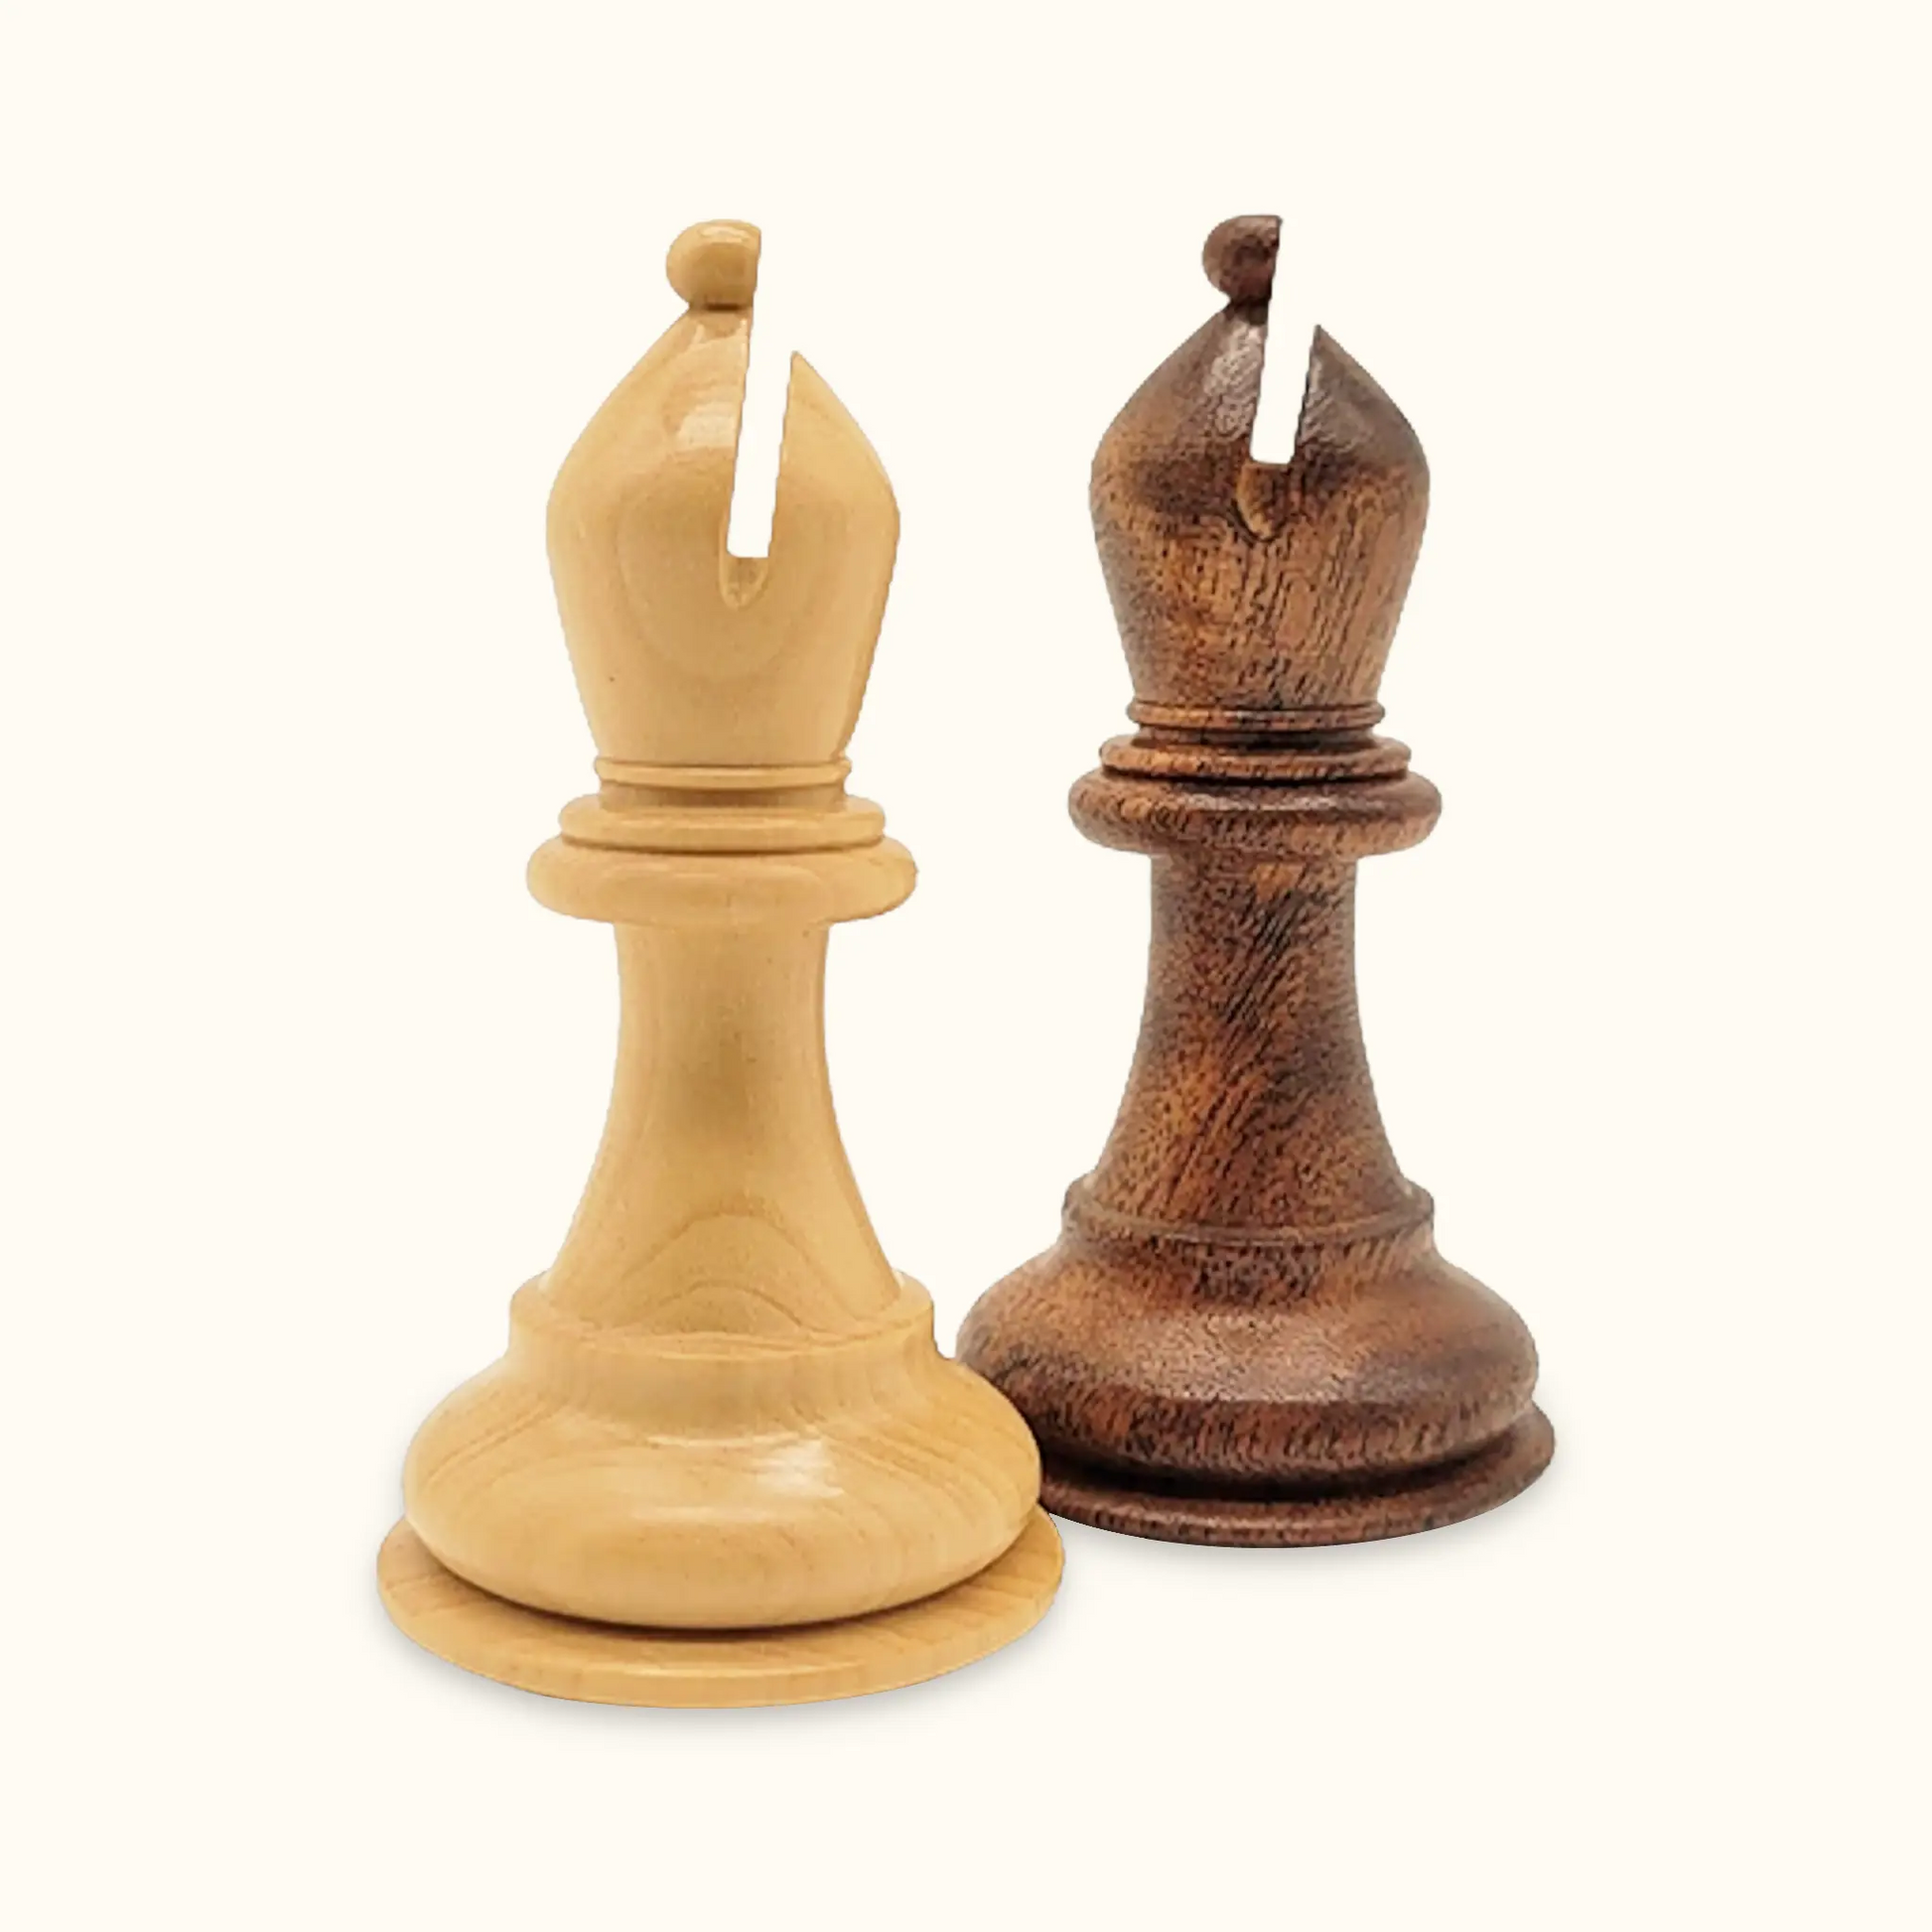 Chess PNG - Chess Piece, Chess Pieces, Chess Board, Chess King, Chess  Queen, Chess Game, Chess Knight, Chess Set, Chess Horse, Chess Pawn, Chess  Bishop, Chess Tournament, Chess Club, Playing Chess, Bishop